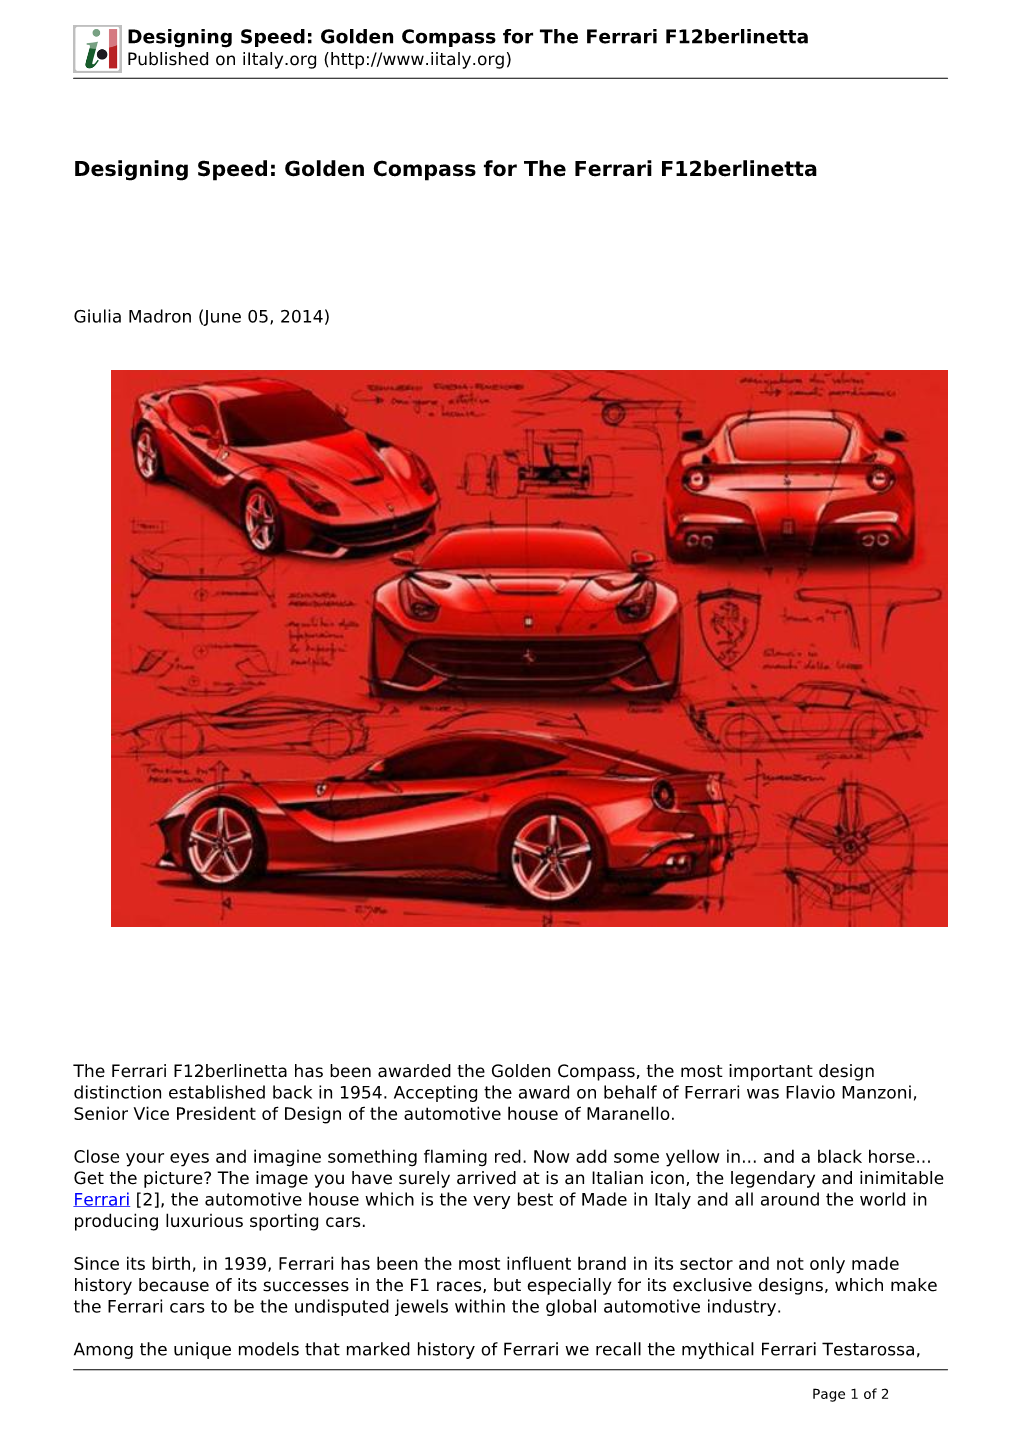 Designing Speed: Golden Compass for the Ferrari F12berlinetta Published on Iitaly.Org (